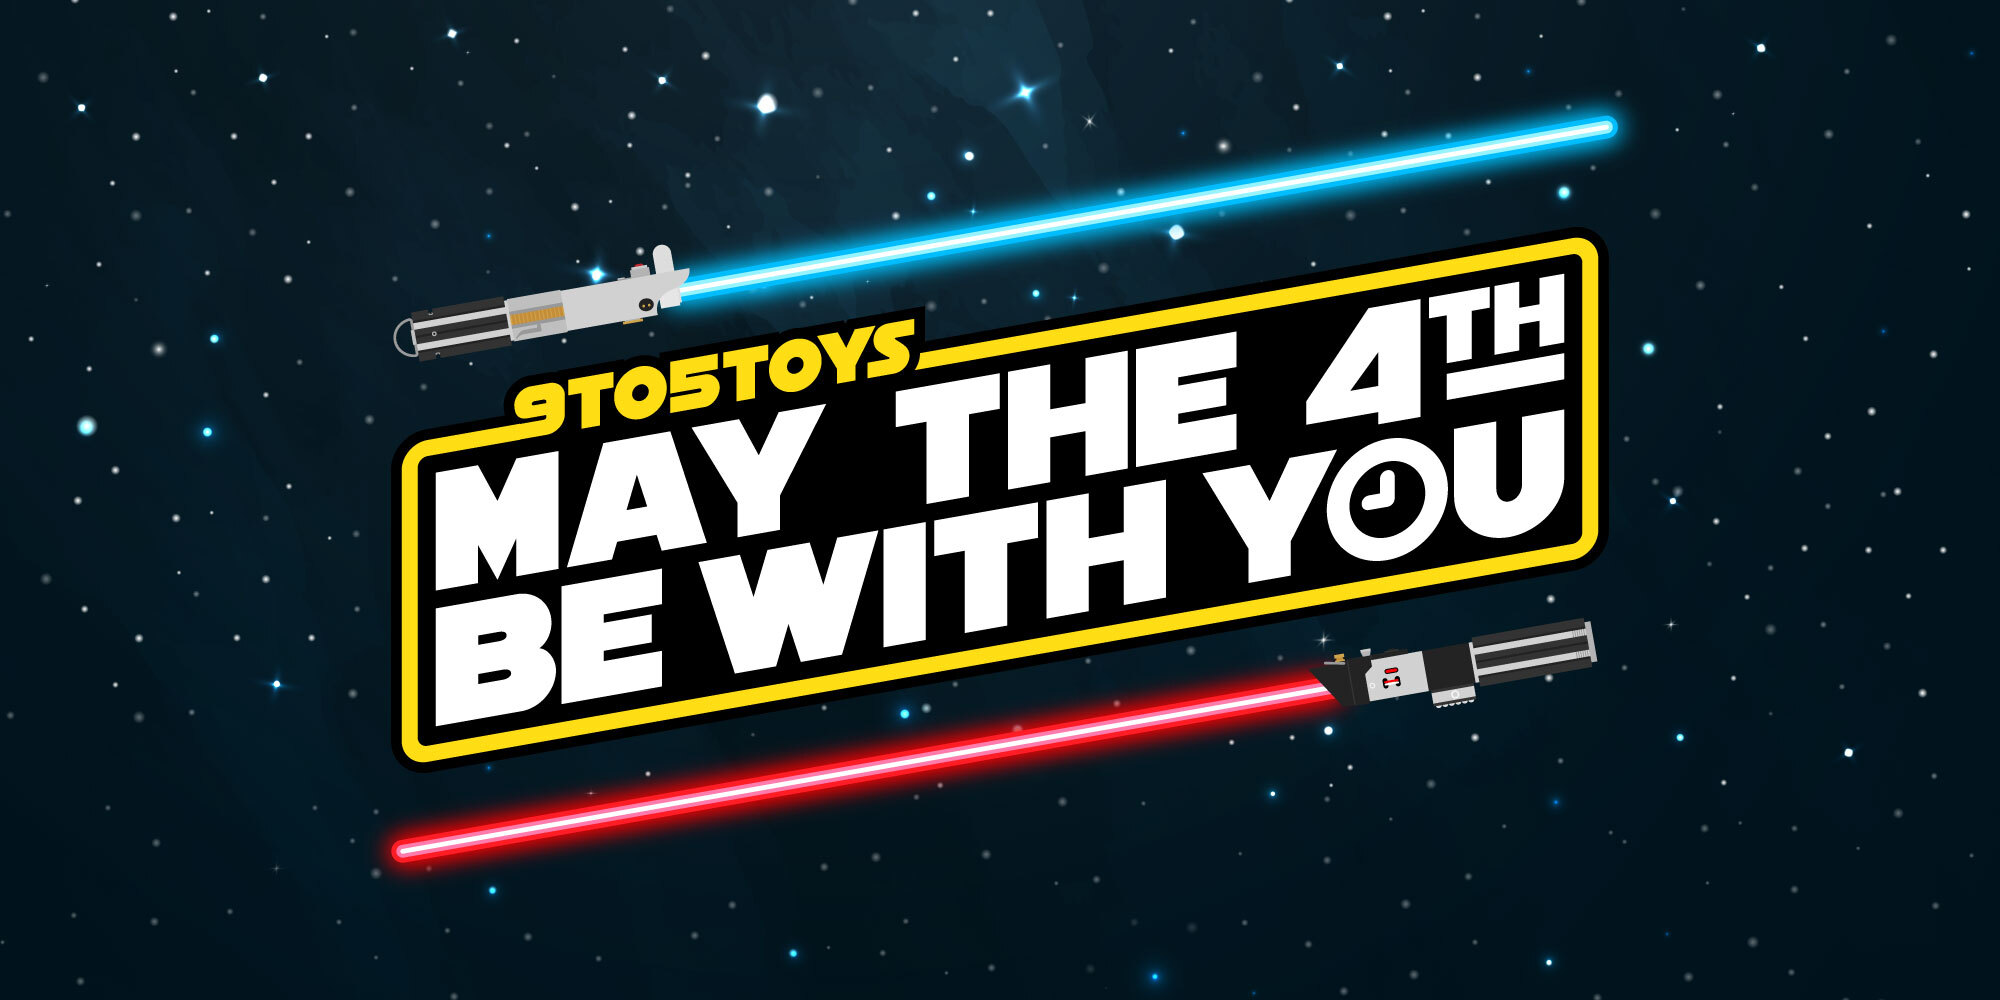 Star Wars Day deals now live for the May the 4th action